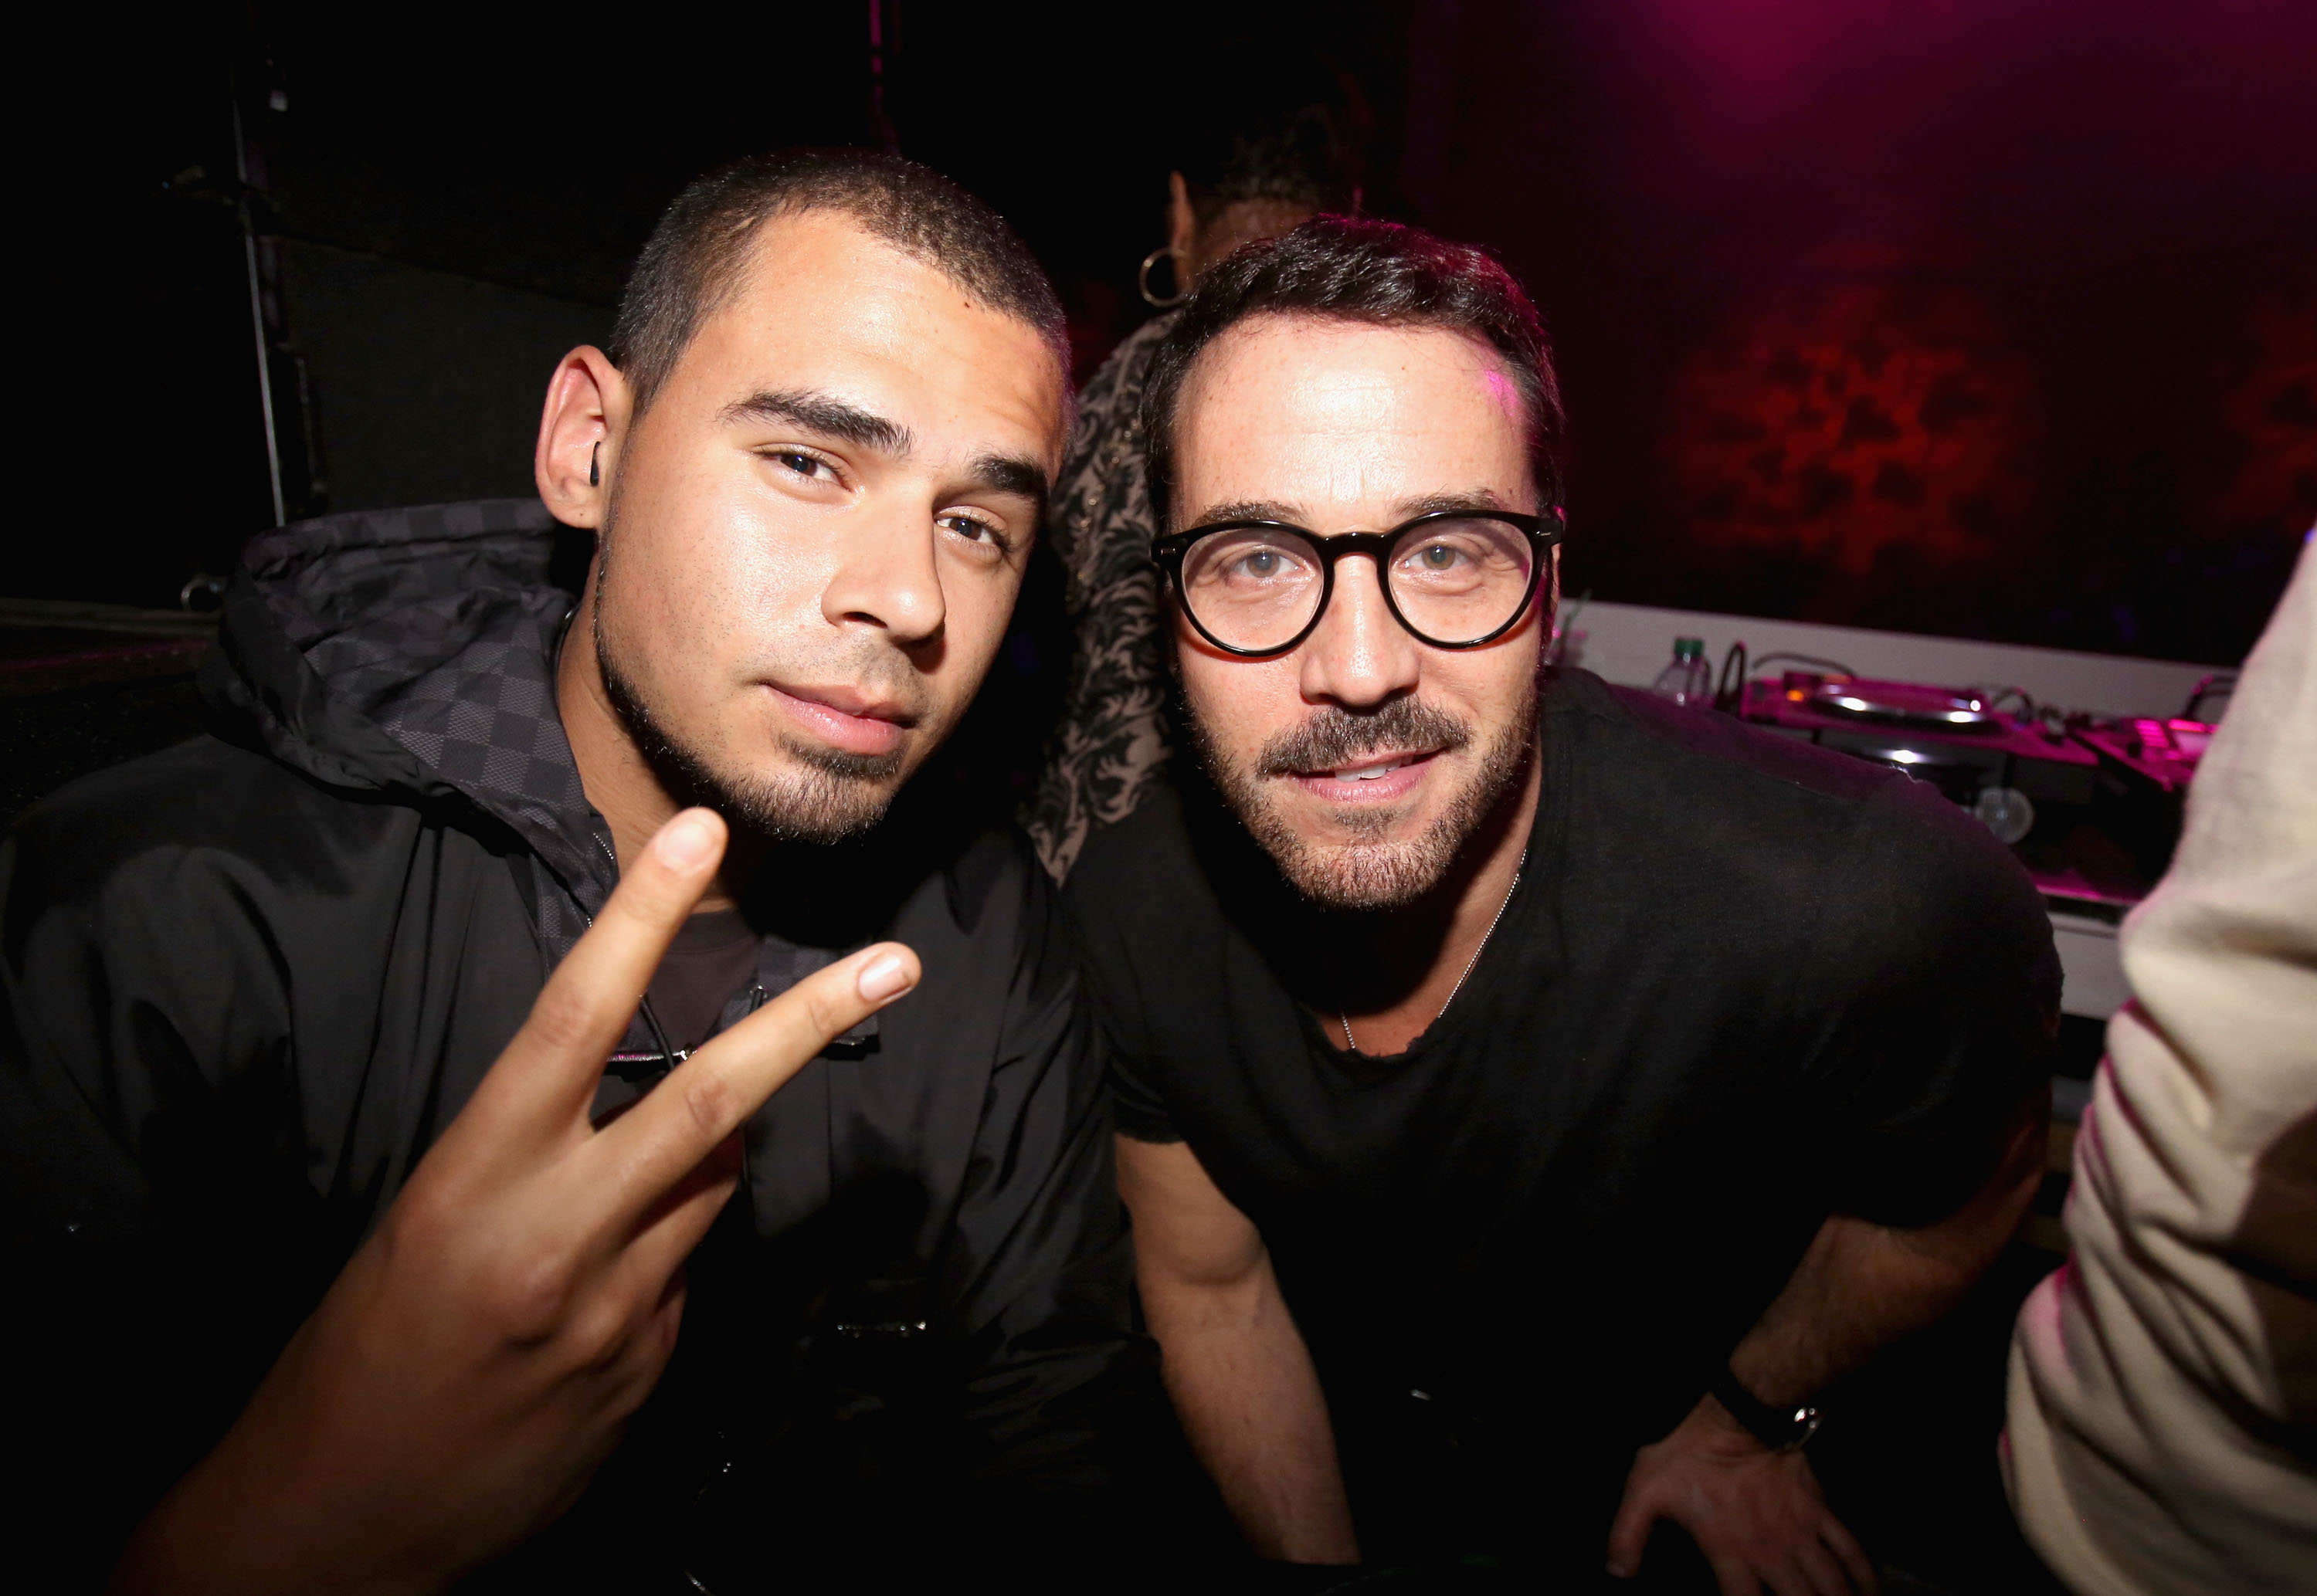 NEW ORLEANS, LA - FEBRUARY 02:  DJ Afrojack and actor Jeremy Piven attend The Maxim Party With "Gears of War: Judgment" For XBOX 360, FOX Sports & Starter Presented by Patron Tequila at Second Line Warehouse on February 1, 2013 in New Orleans, Louisiana.  (Photo by Tasos Katopodis/Getty Images for Maxim)